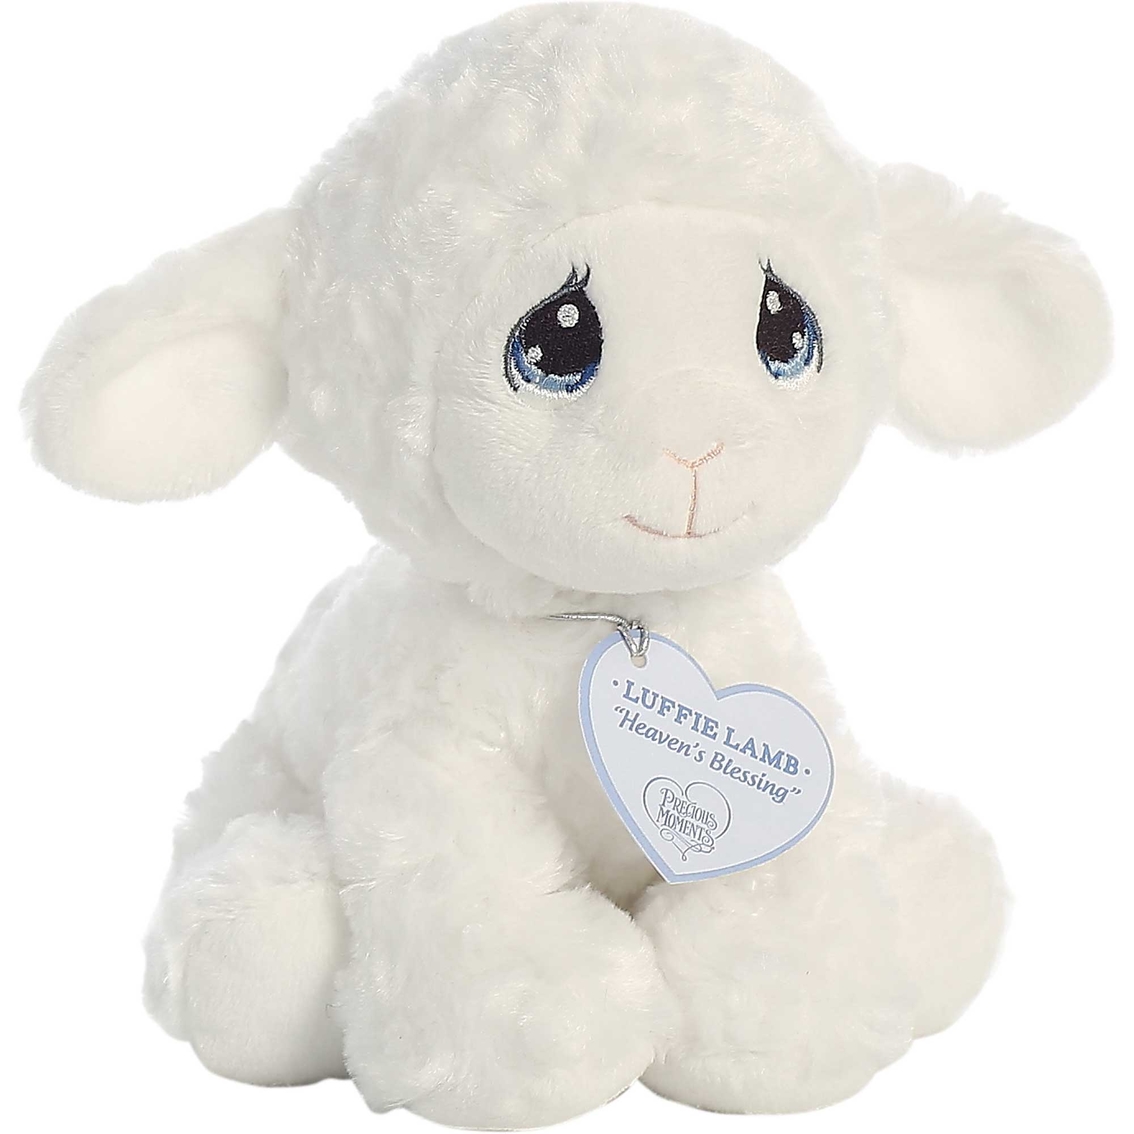 Aurora Precious Moments Luffie Lamb Small 8.5 in. Plush Toy - Image 2 of 2